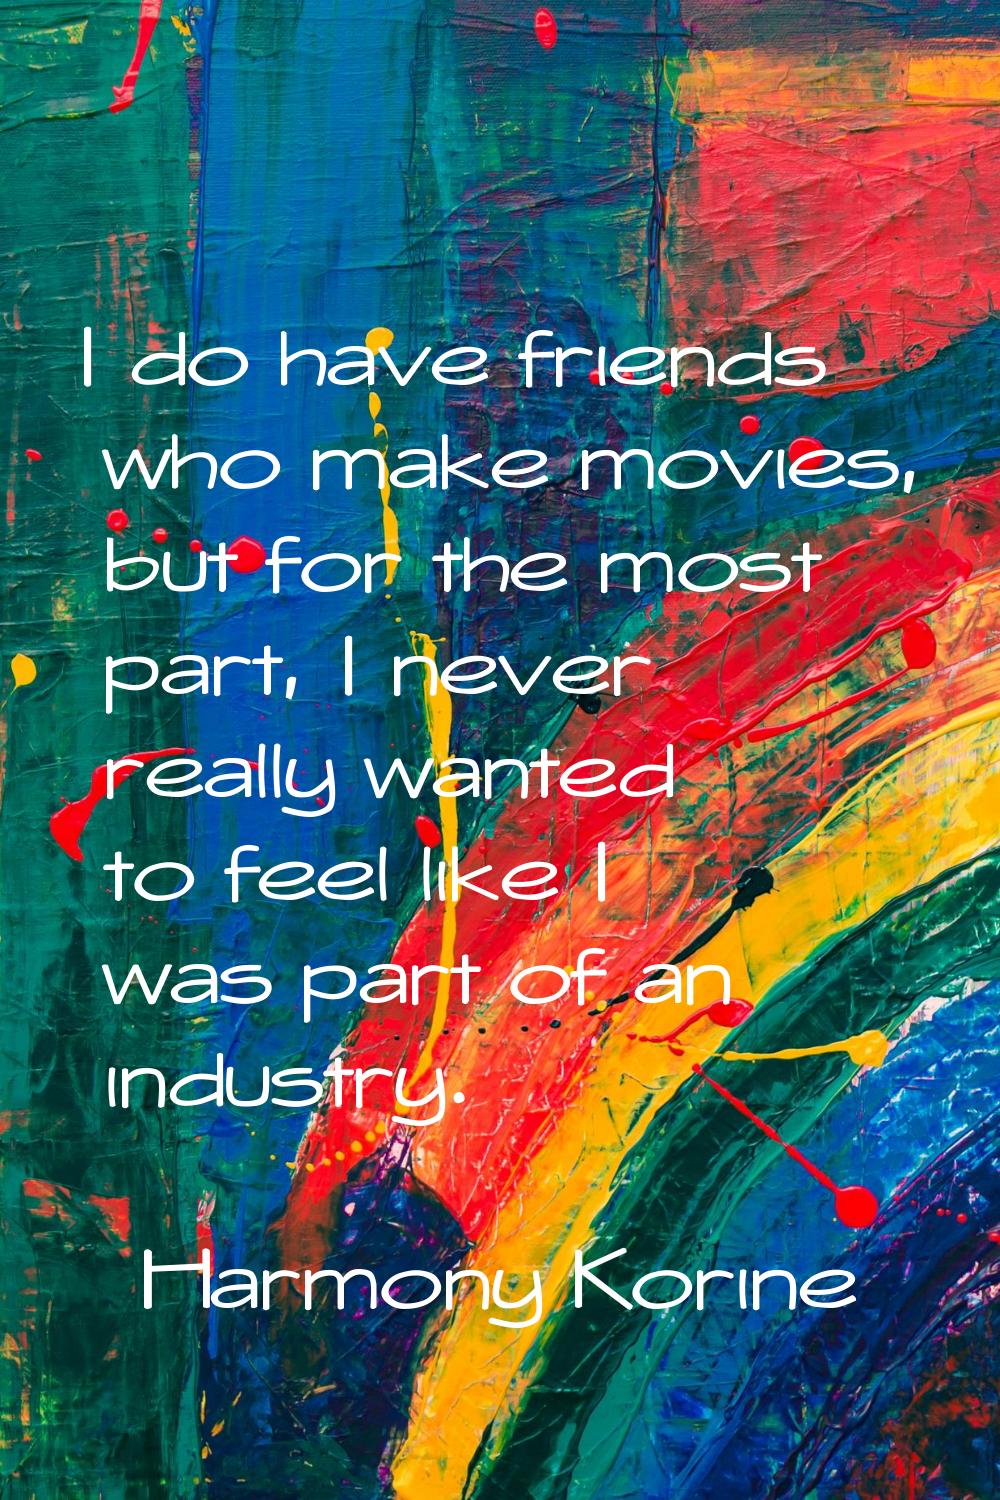 I do have friends who make movies, but for the most part, I never really wanted to feel like I was 